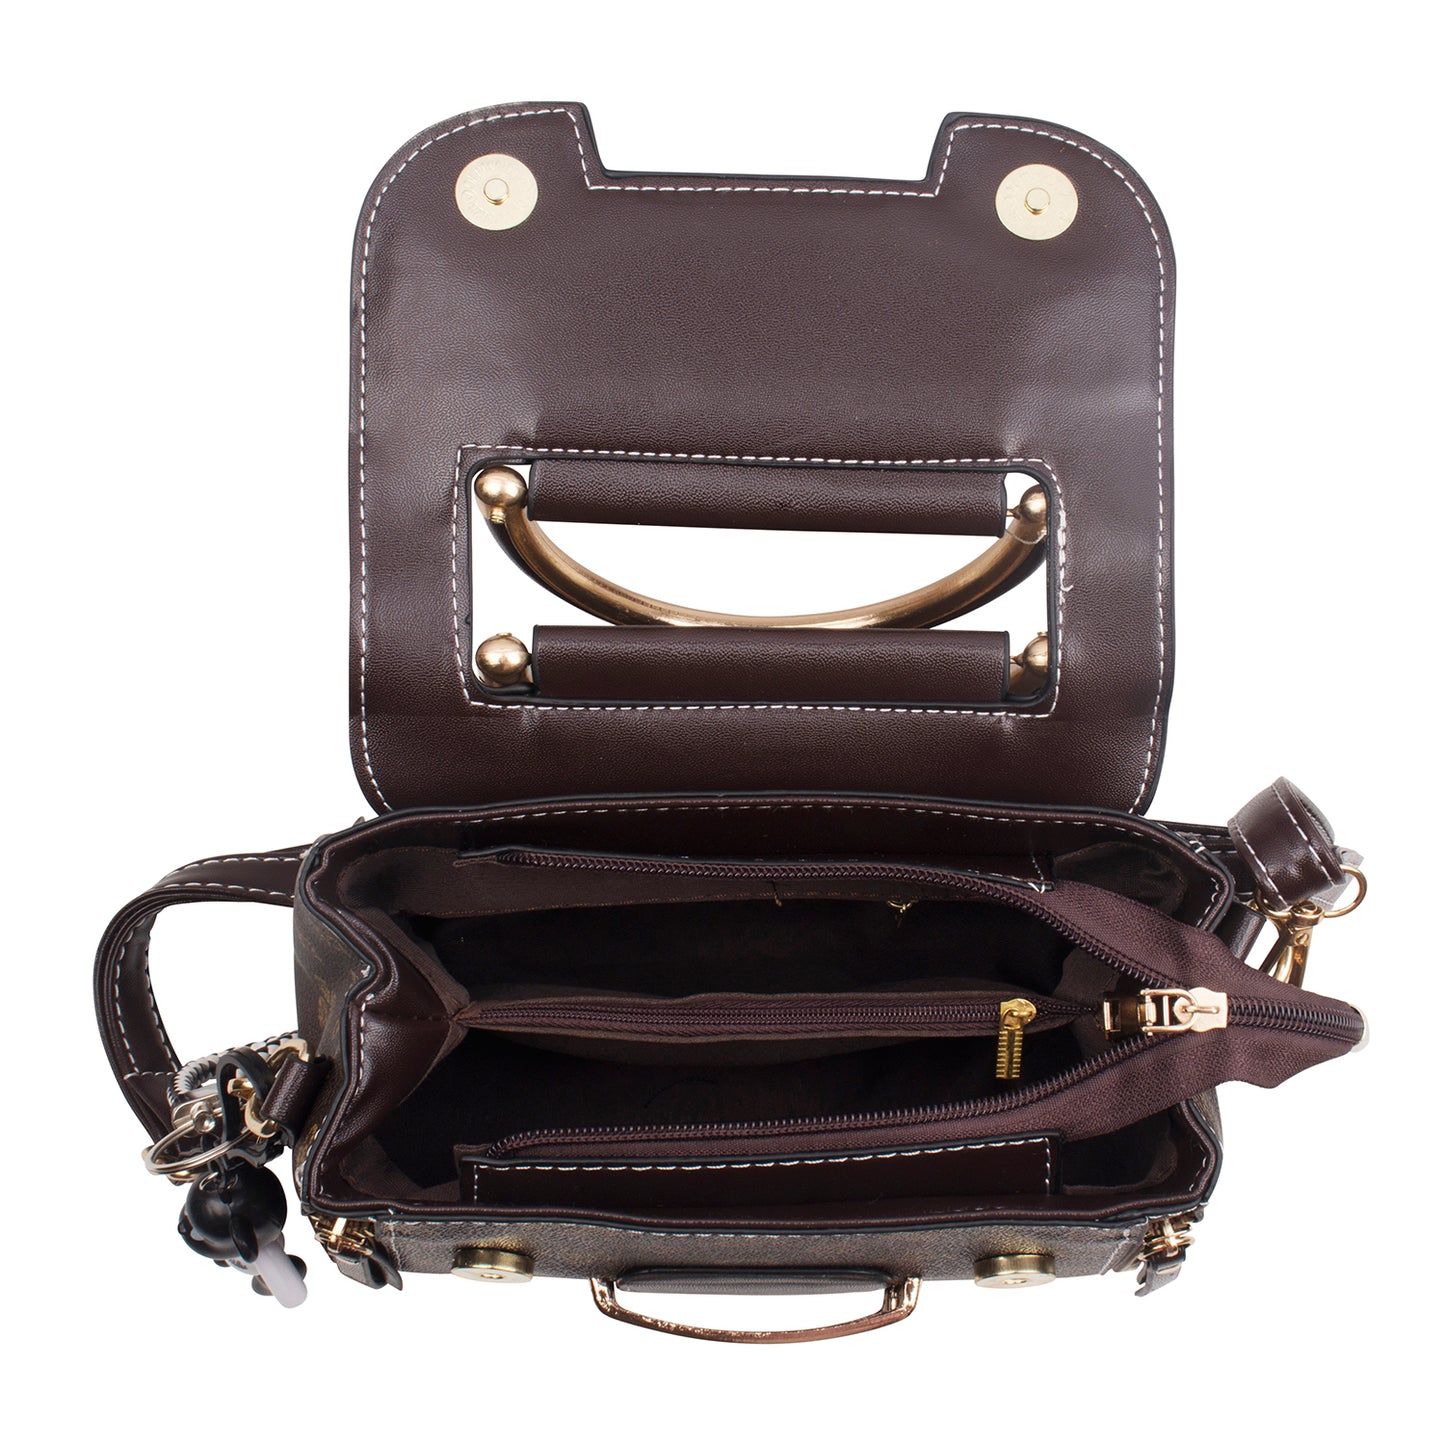 Modern Brown small size Sling Bag for Women